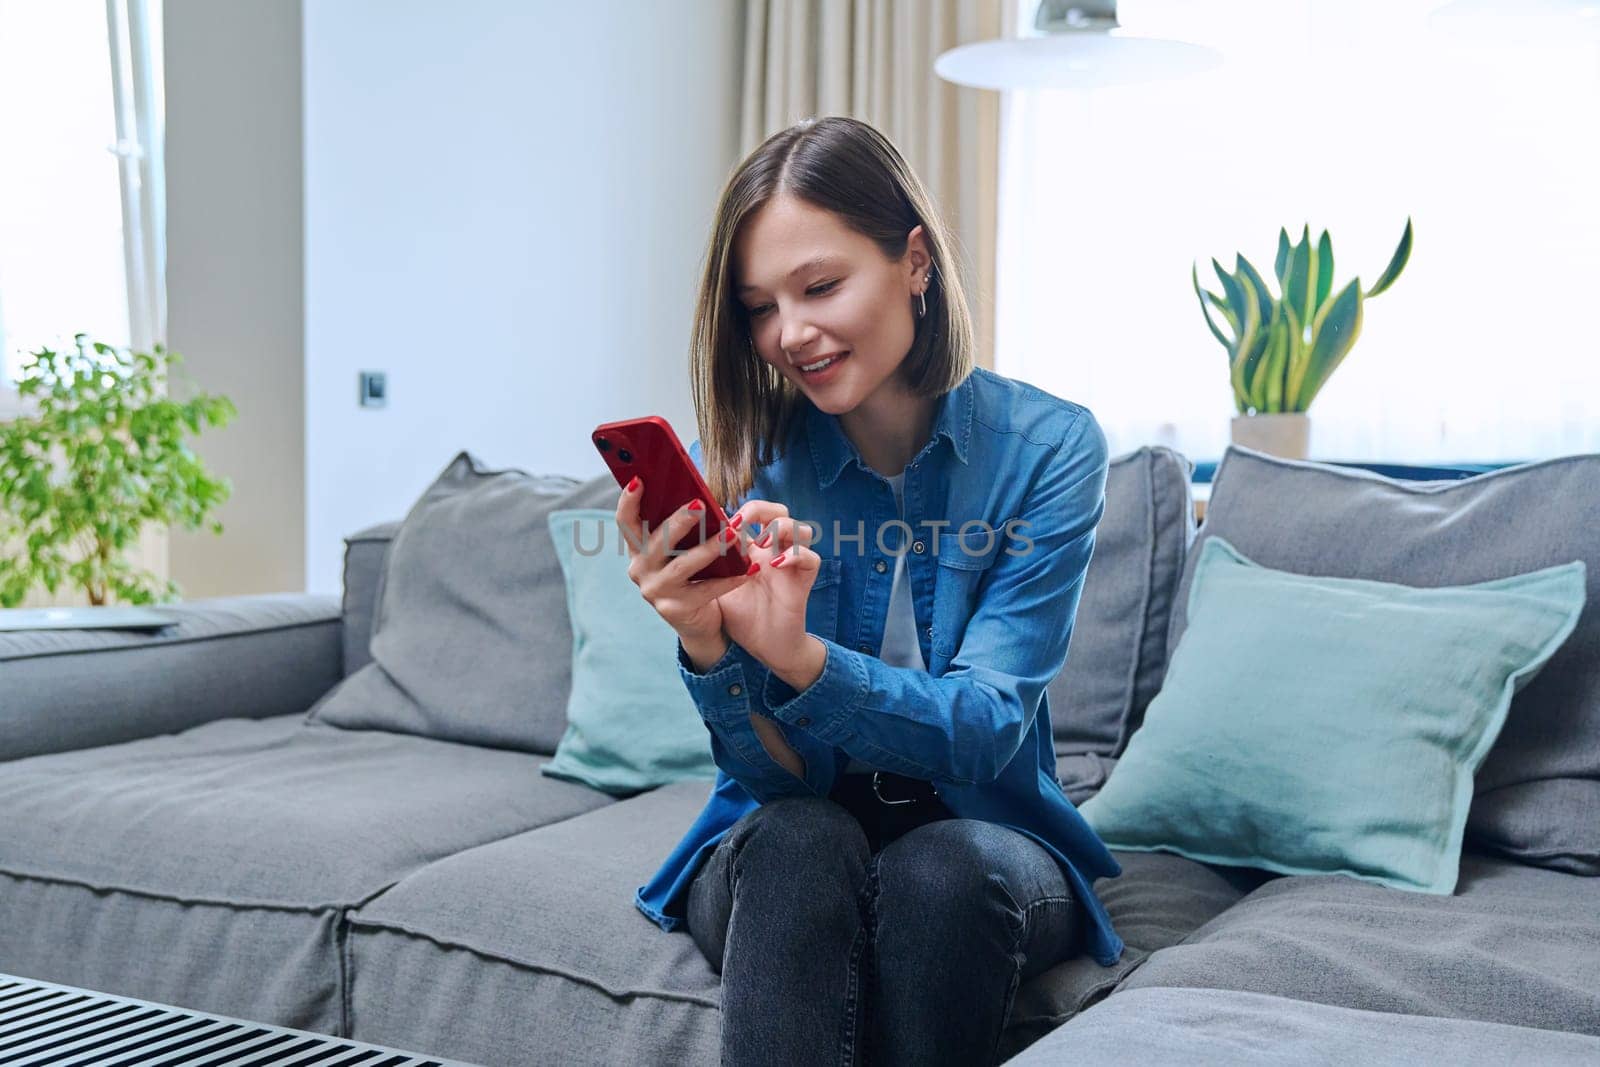 Young fashionable beautiful woman at home on couch in living room using smartphone. Internet online service, technology, mobile applications for study leisure life work shopping